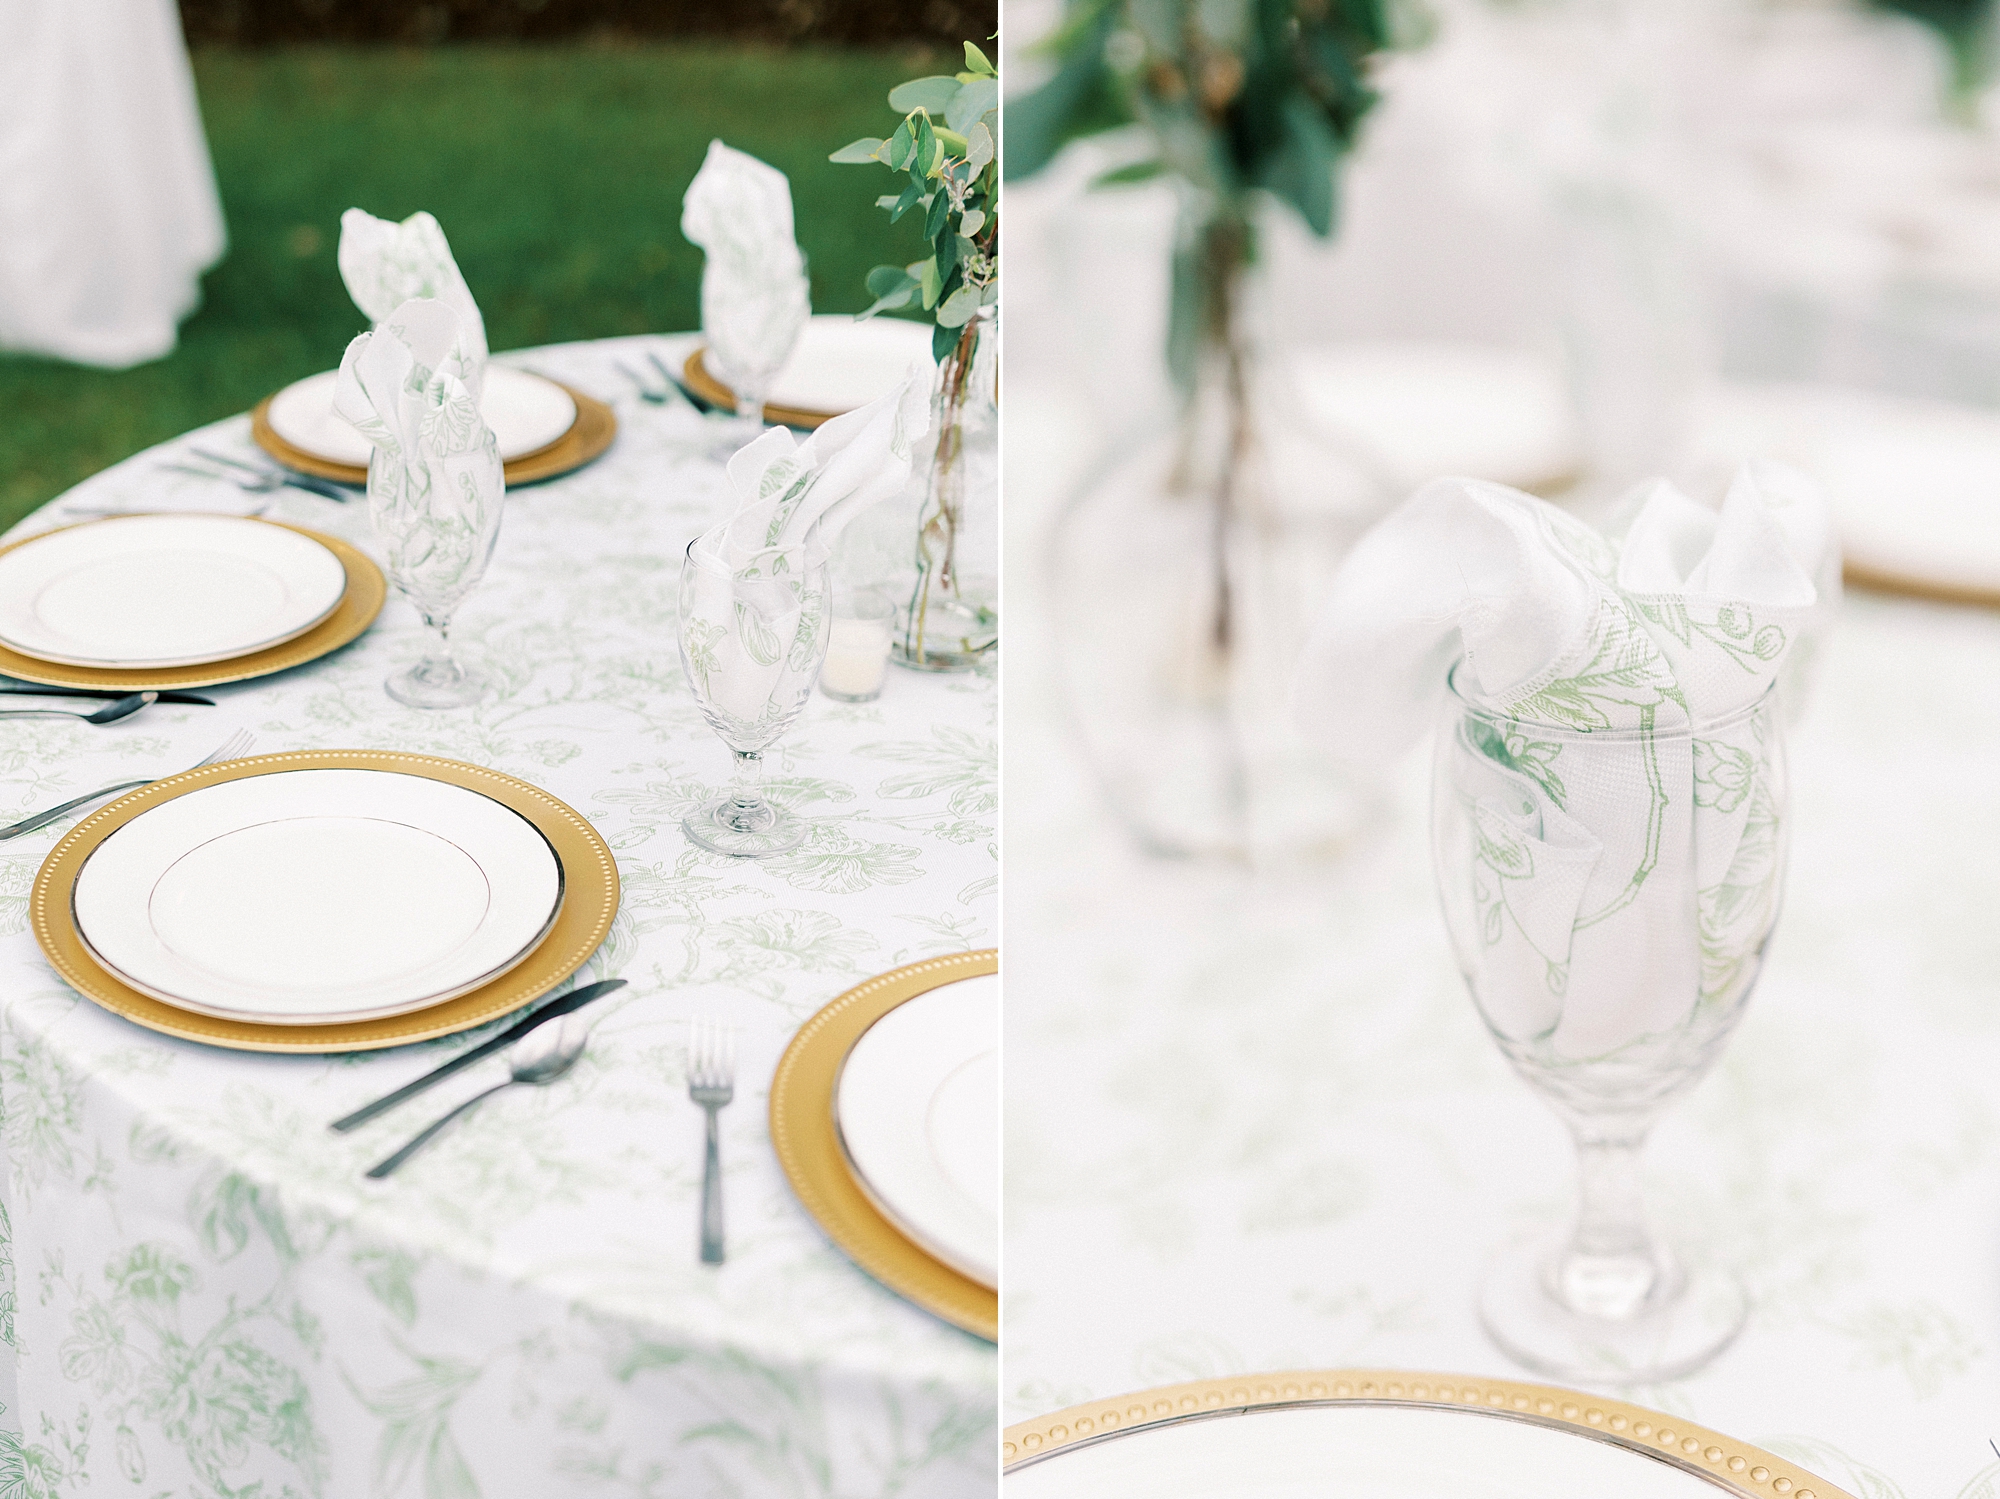 reception place settings with gold and white details 